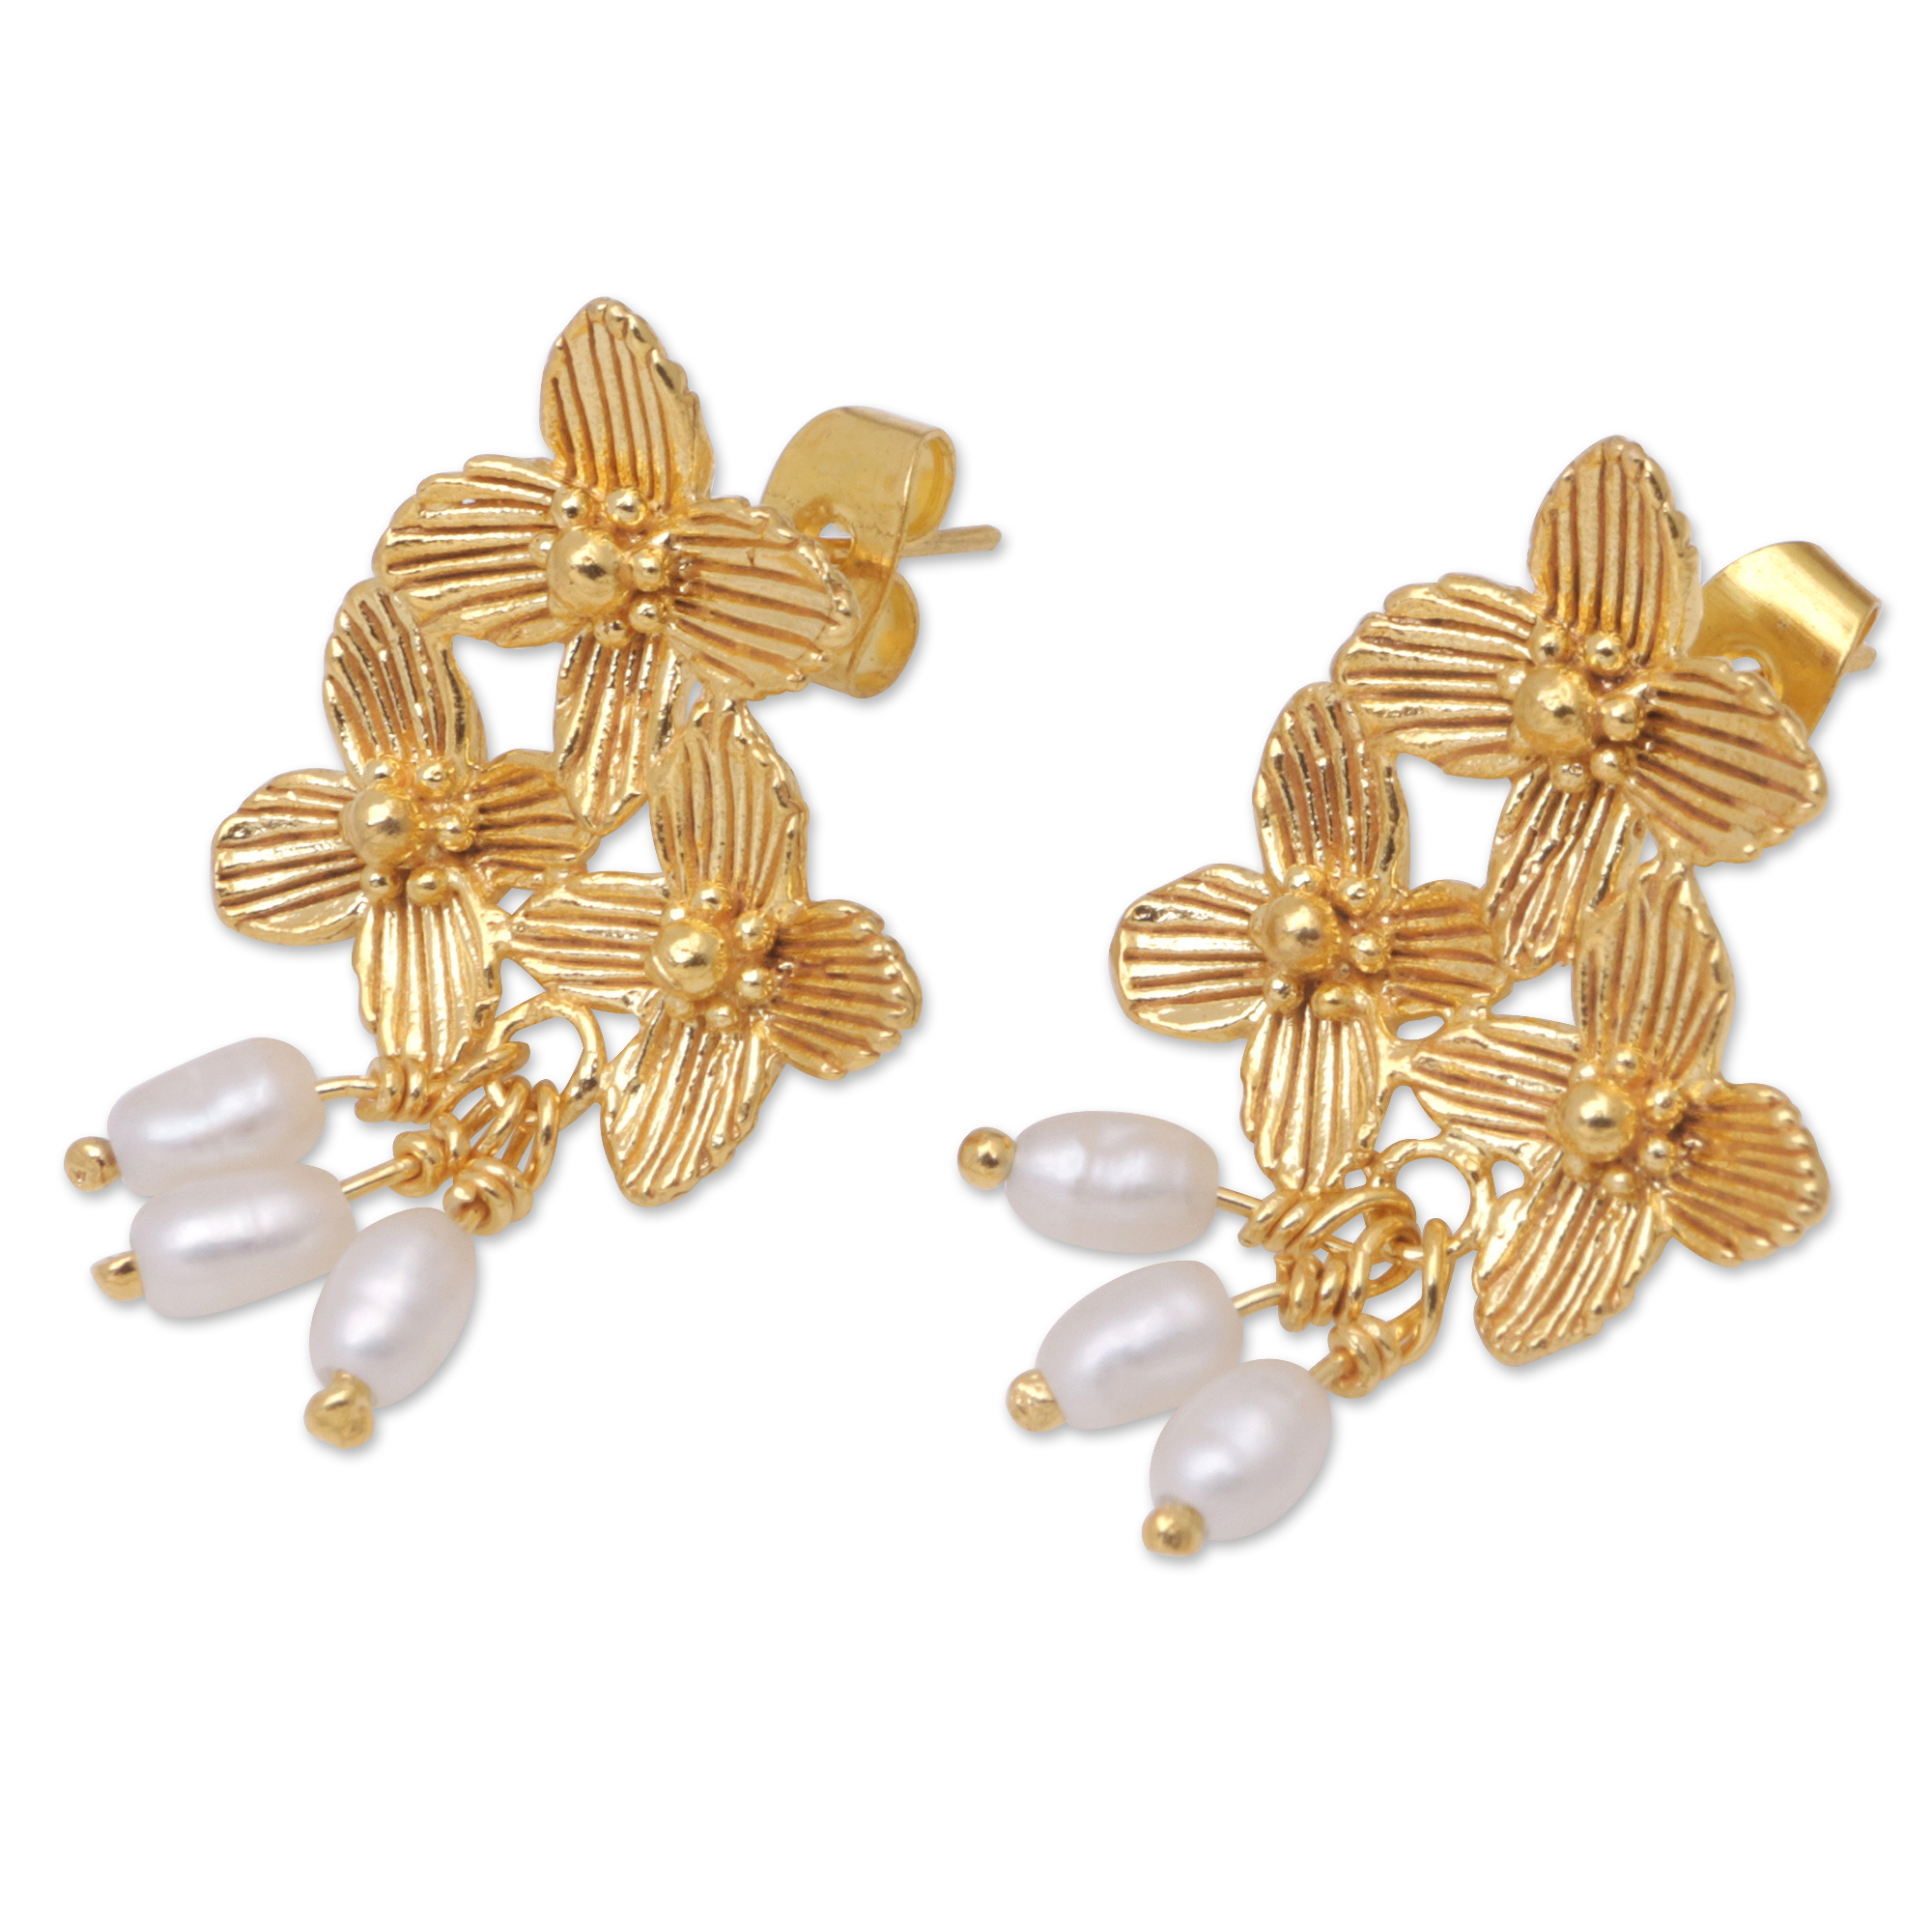 22k Gold-Plated Dangle Earrings with Cultured Pearls - Blooming Trinity ...